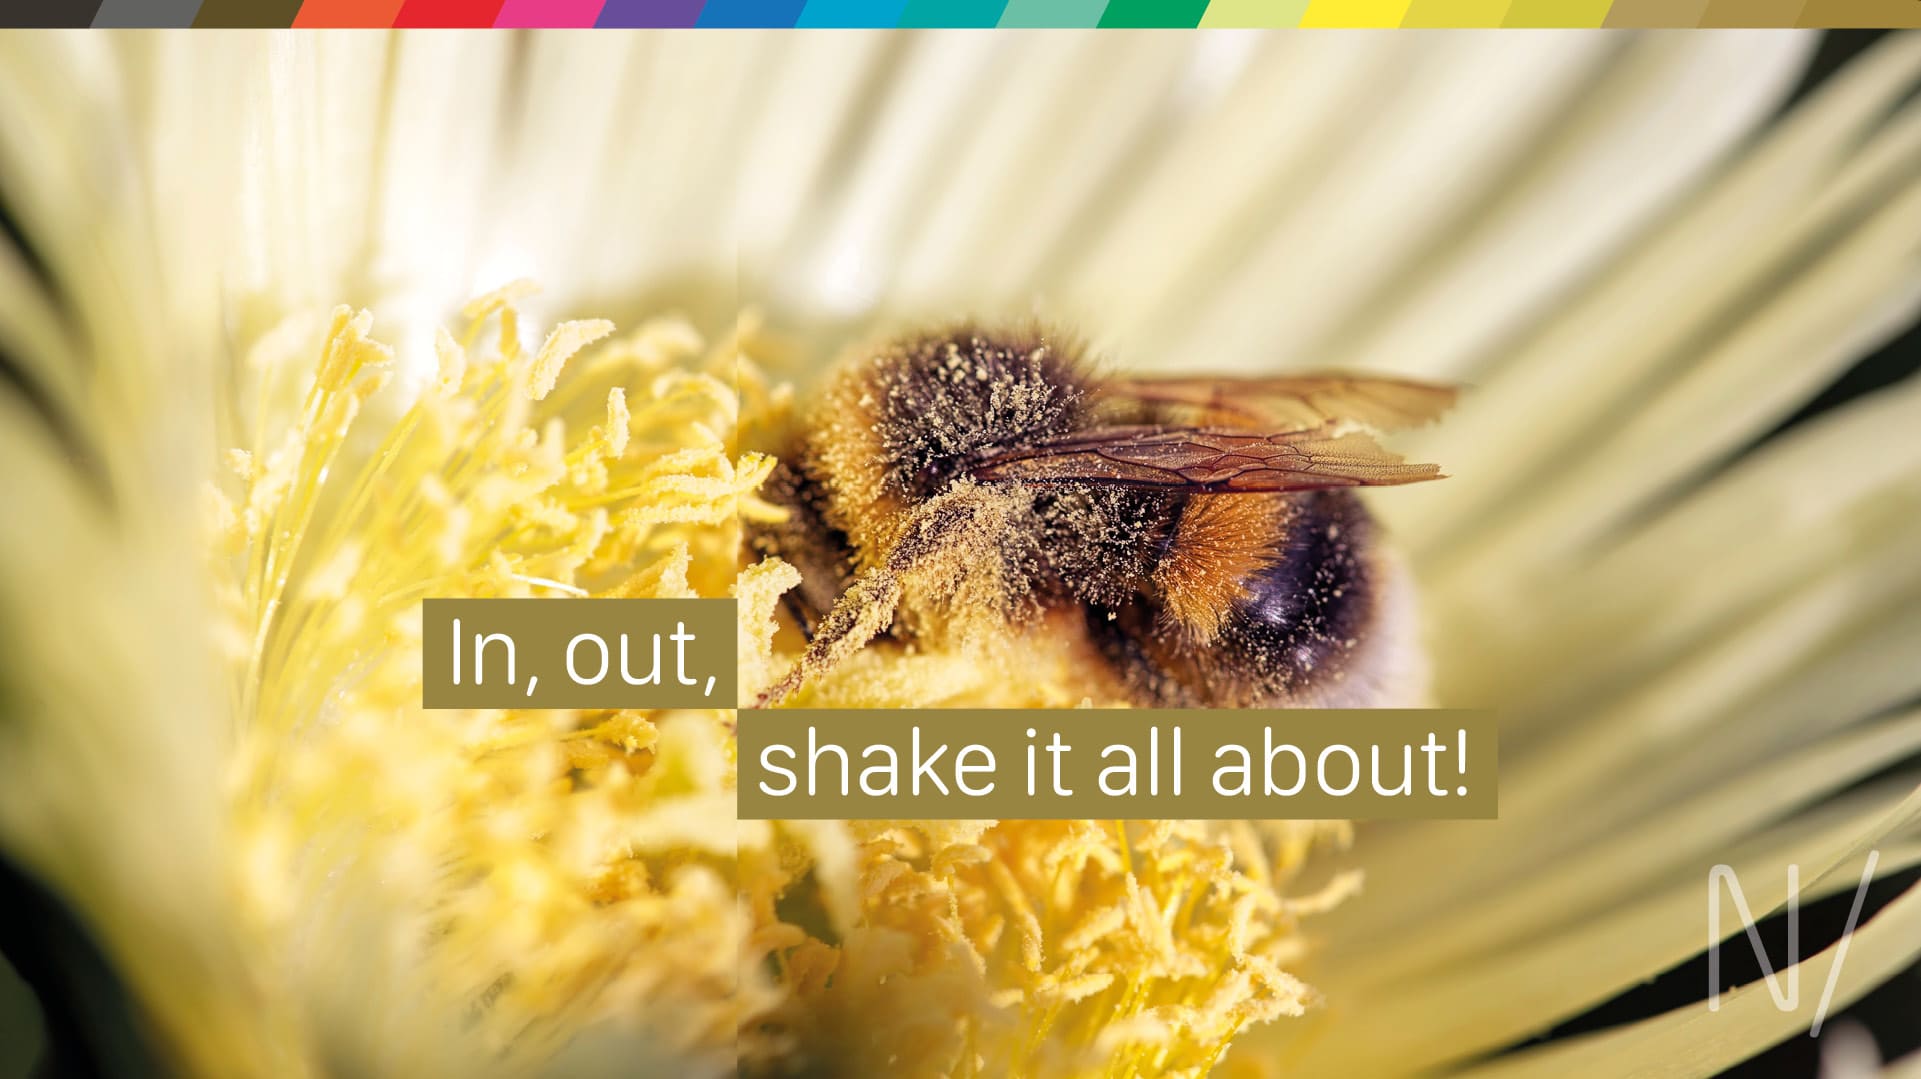 A picture of a bumble bee pollinating a flower is used to represent how a creative agency uses its knowledge of different business sectors to cross-pollinate ideas and develop new concepts.